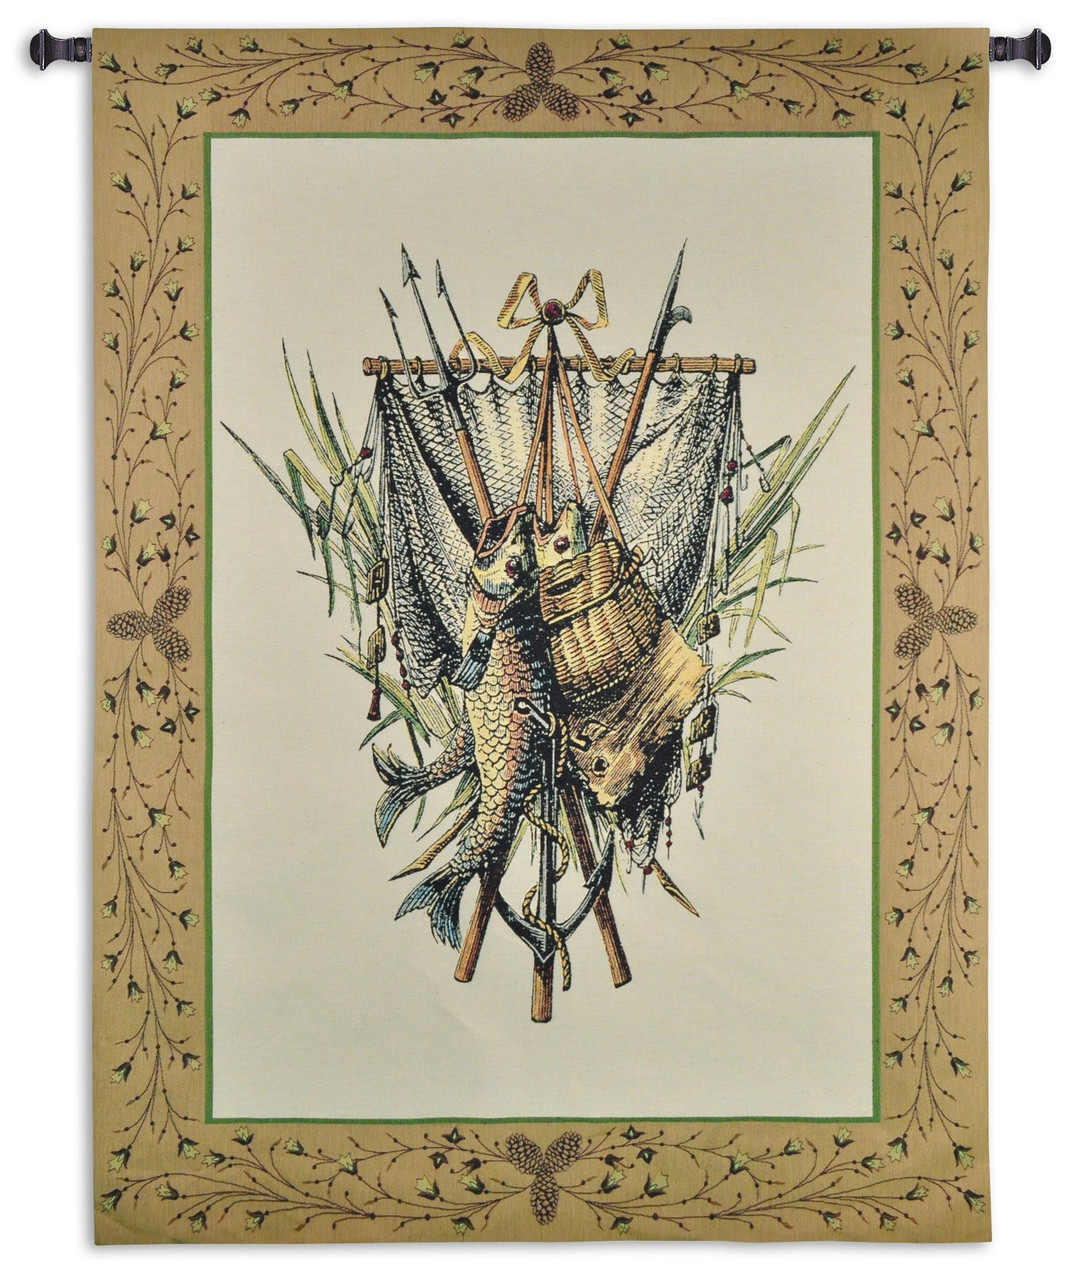 Fishing Supplies with Caught Fish Cabin Lodge Decor, 100% Cotton USA Size  59x44 - Fishing Gear